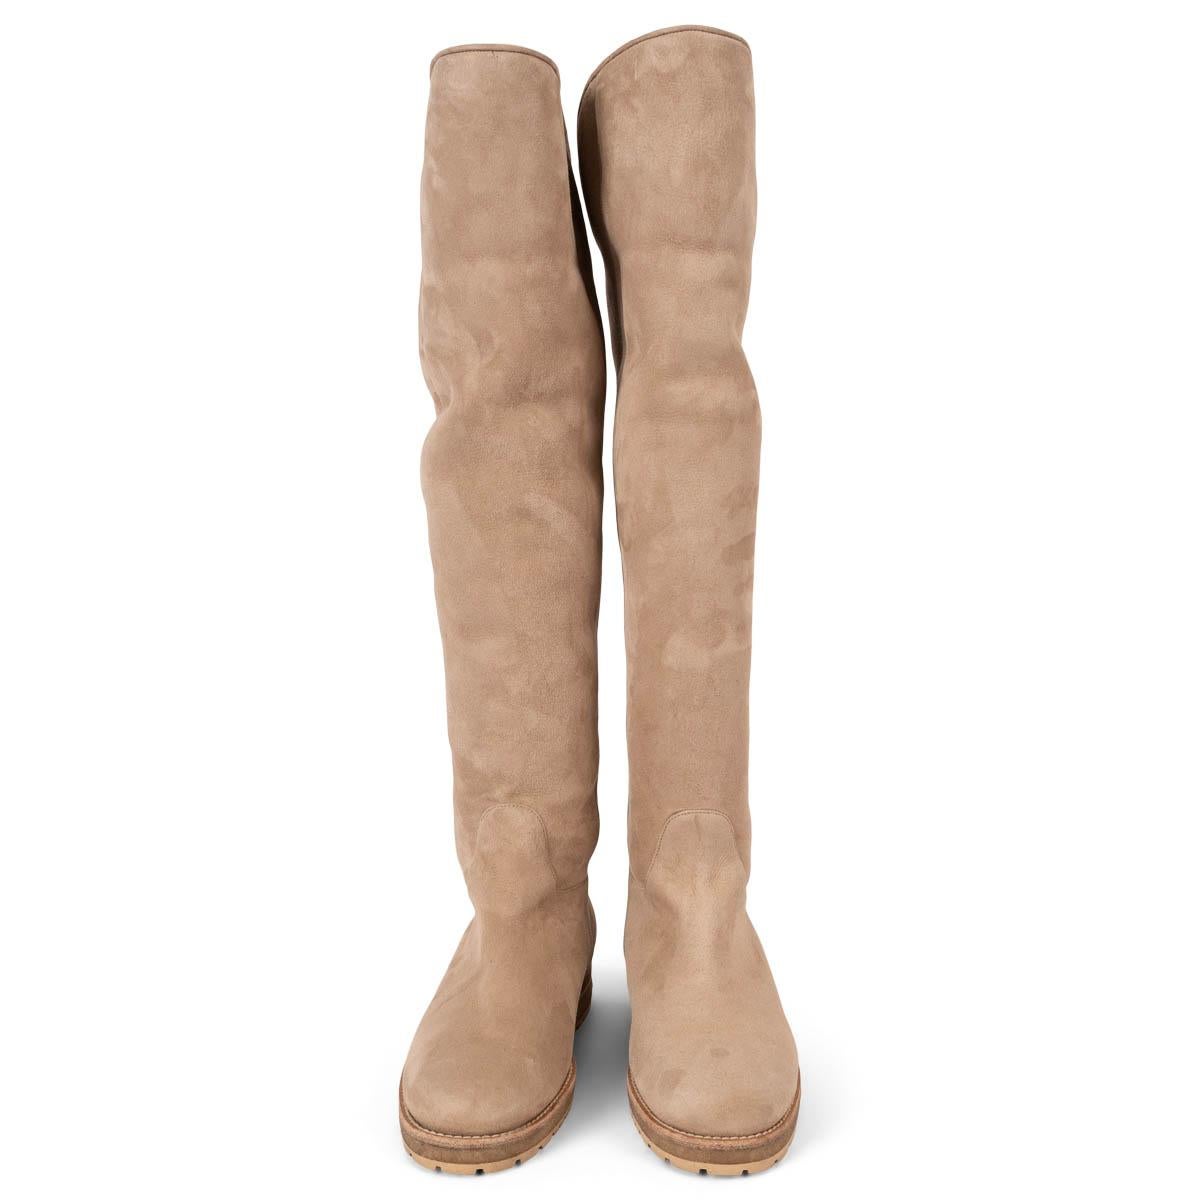 100% authentic Loro Piana shearling lined over-knee boots in beige suede with rubber sole. Have been worn and are in excellent condition. 

Measurements
Imprinted Size	41
Shoe Size	41
Inside Sole	28cm (10.9in)
Width	8cm (3.1in)
Heel	3cm